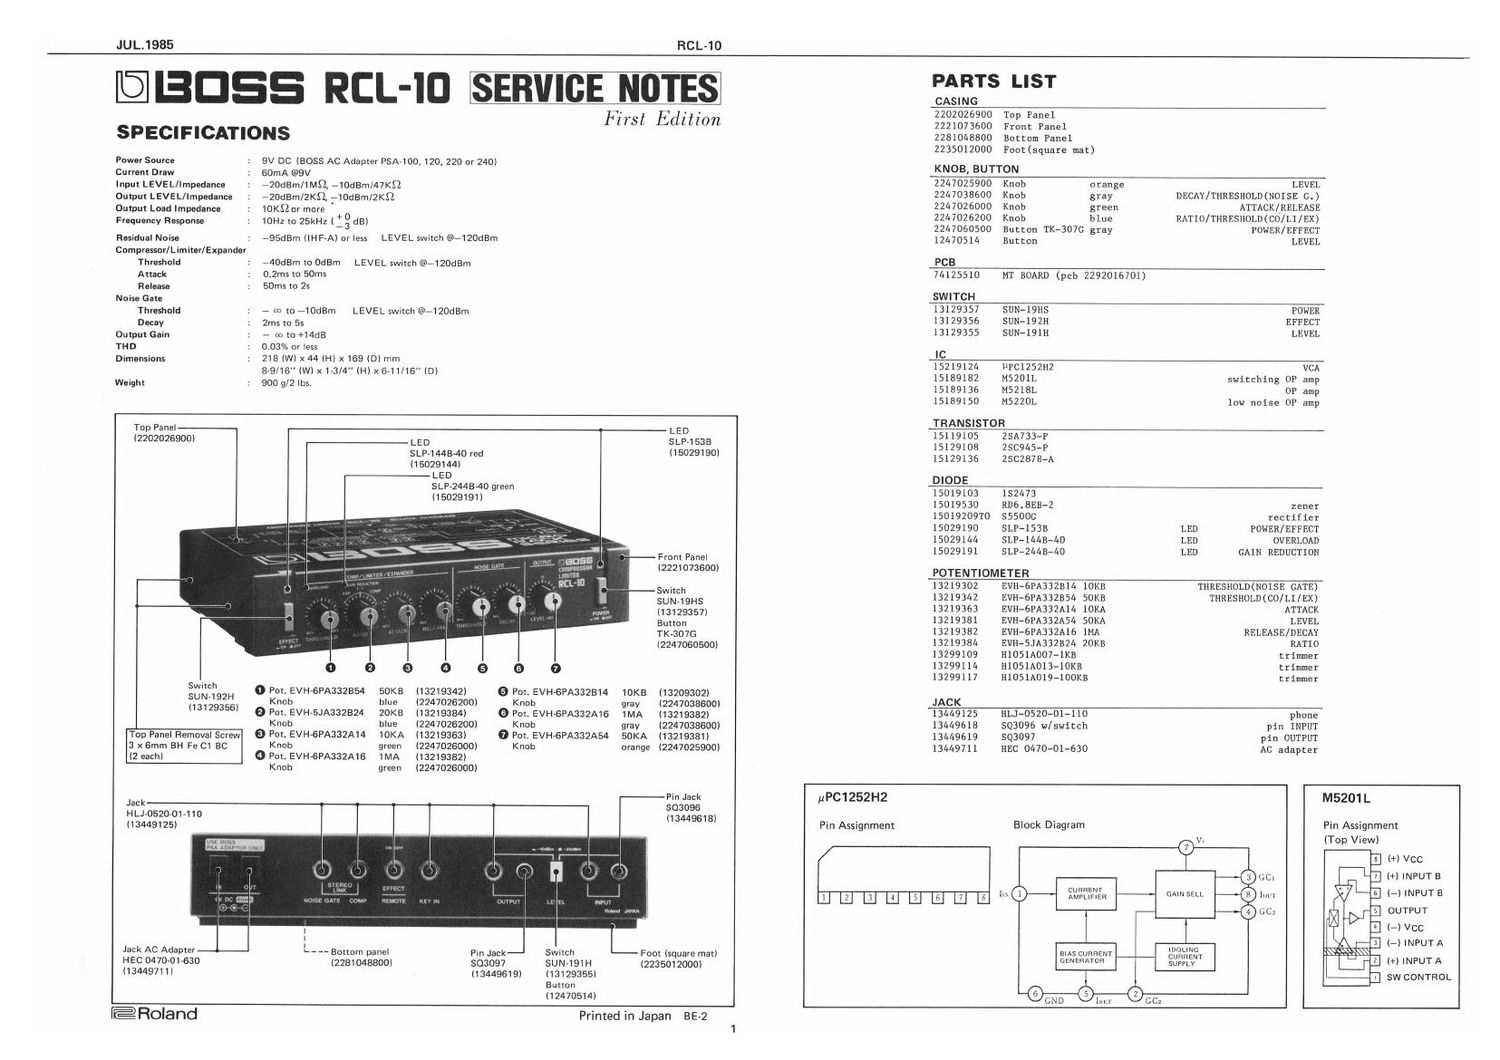 BOSS RCL 10 SERVICE NOTES